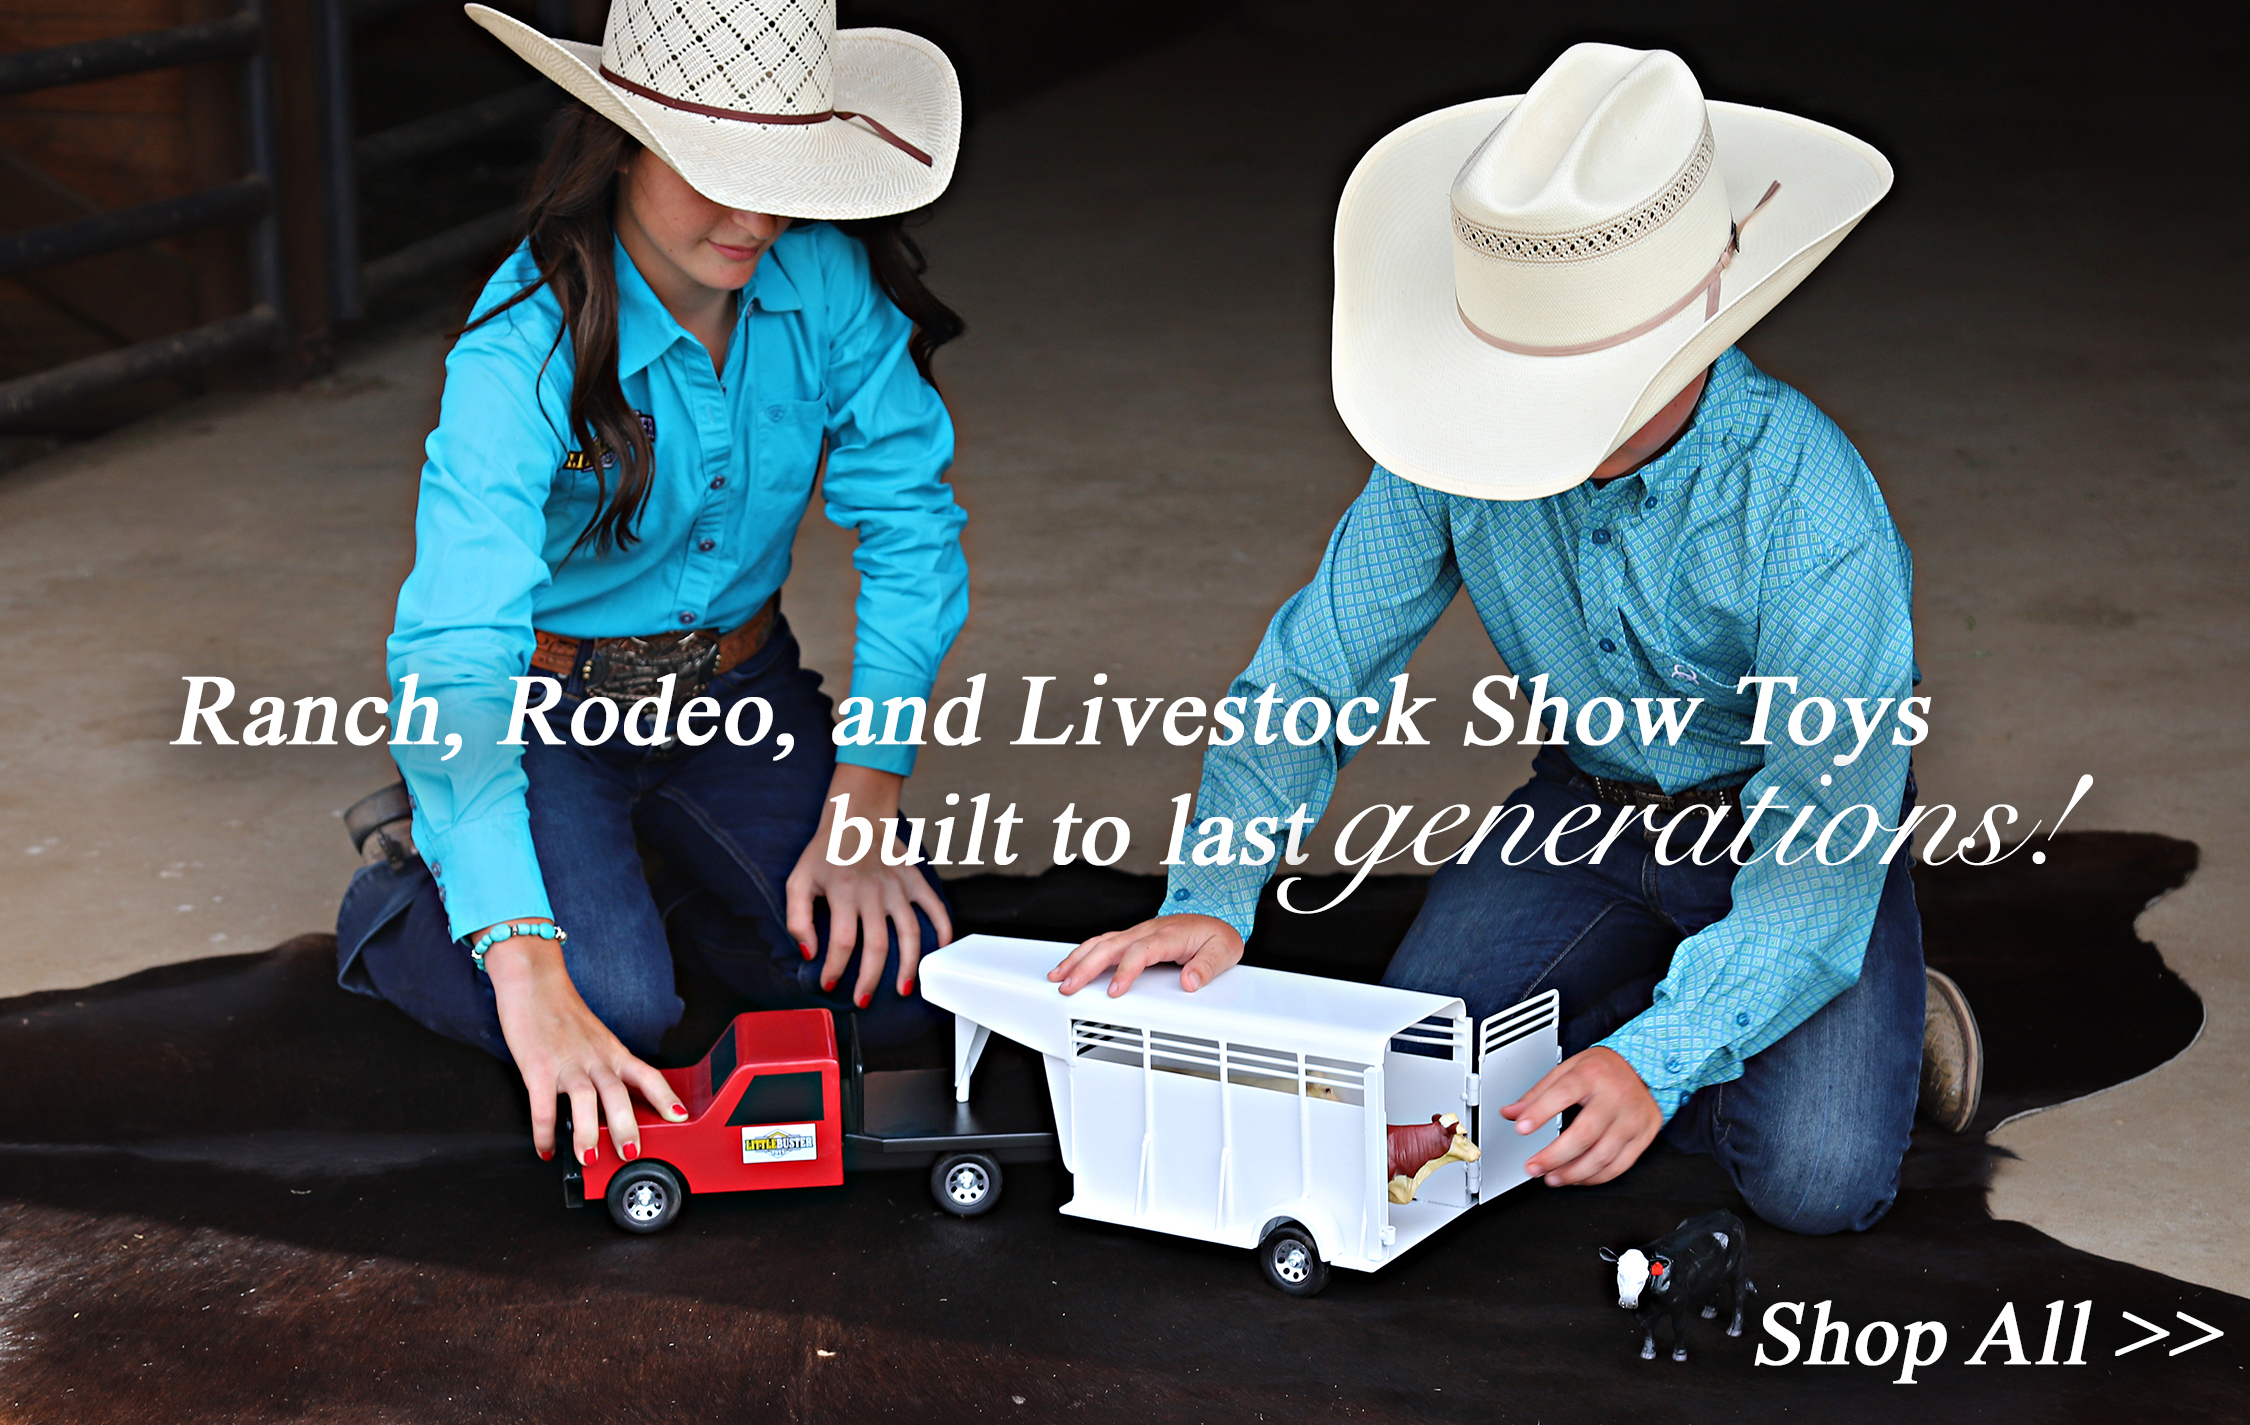 Ranch, Rodeo, and Livestock Show Toys built to last generations!